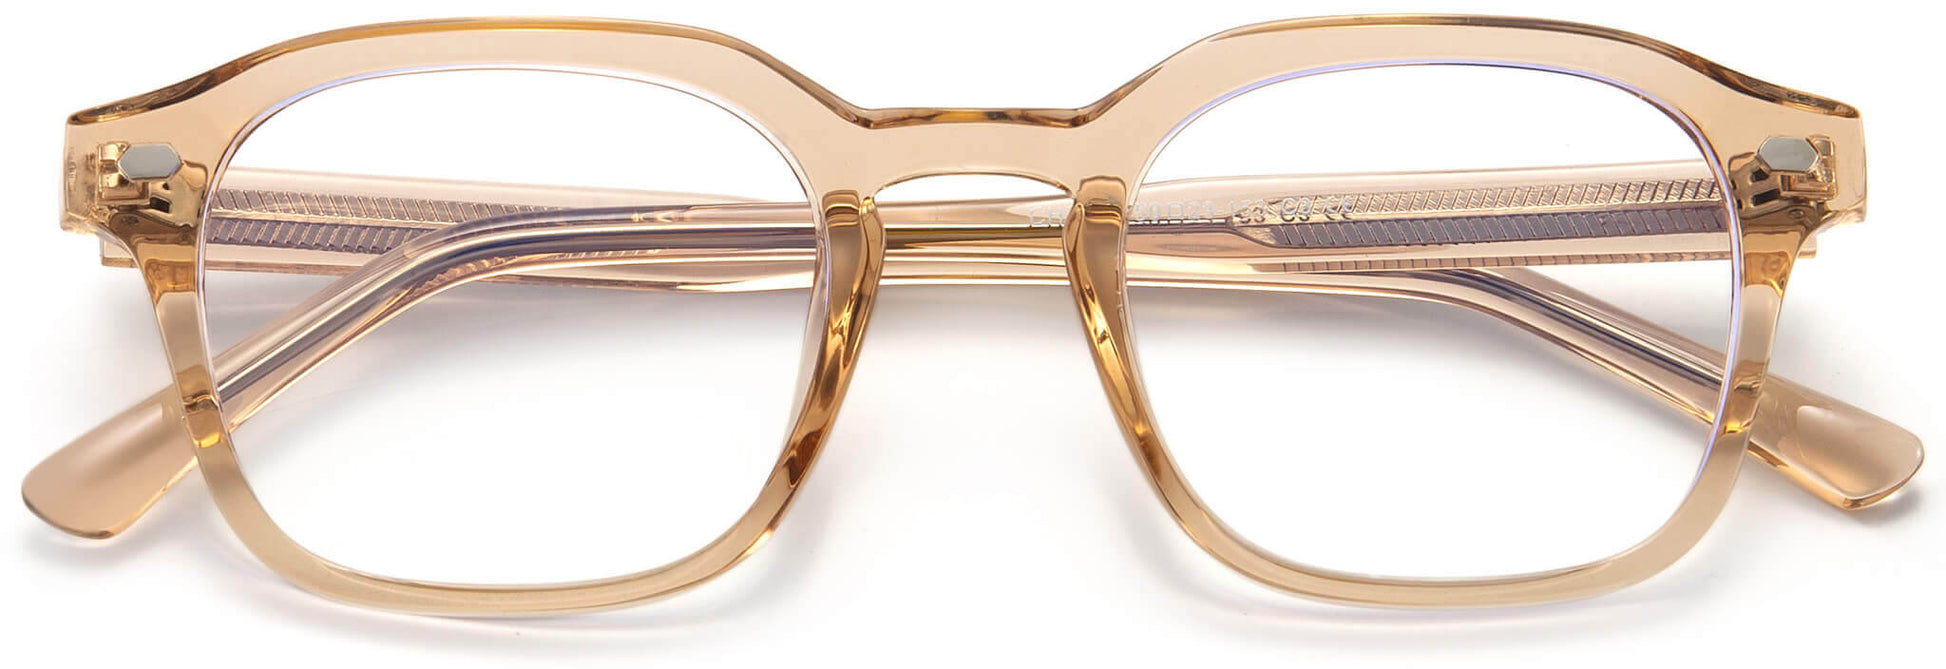 Yenge Clear Pink Acetate Eyeglasses from ANRRI, Closed View